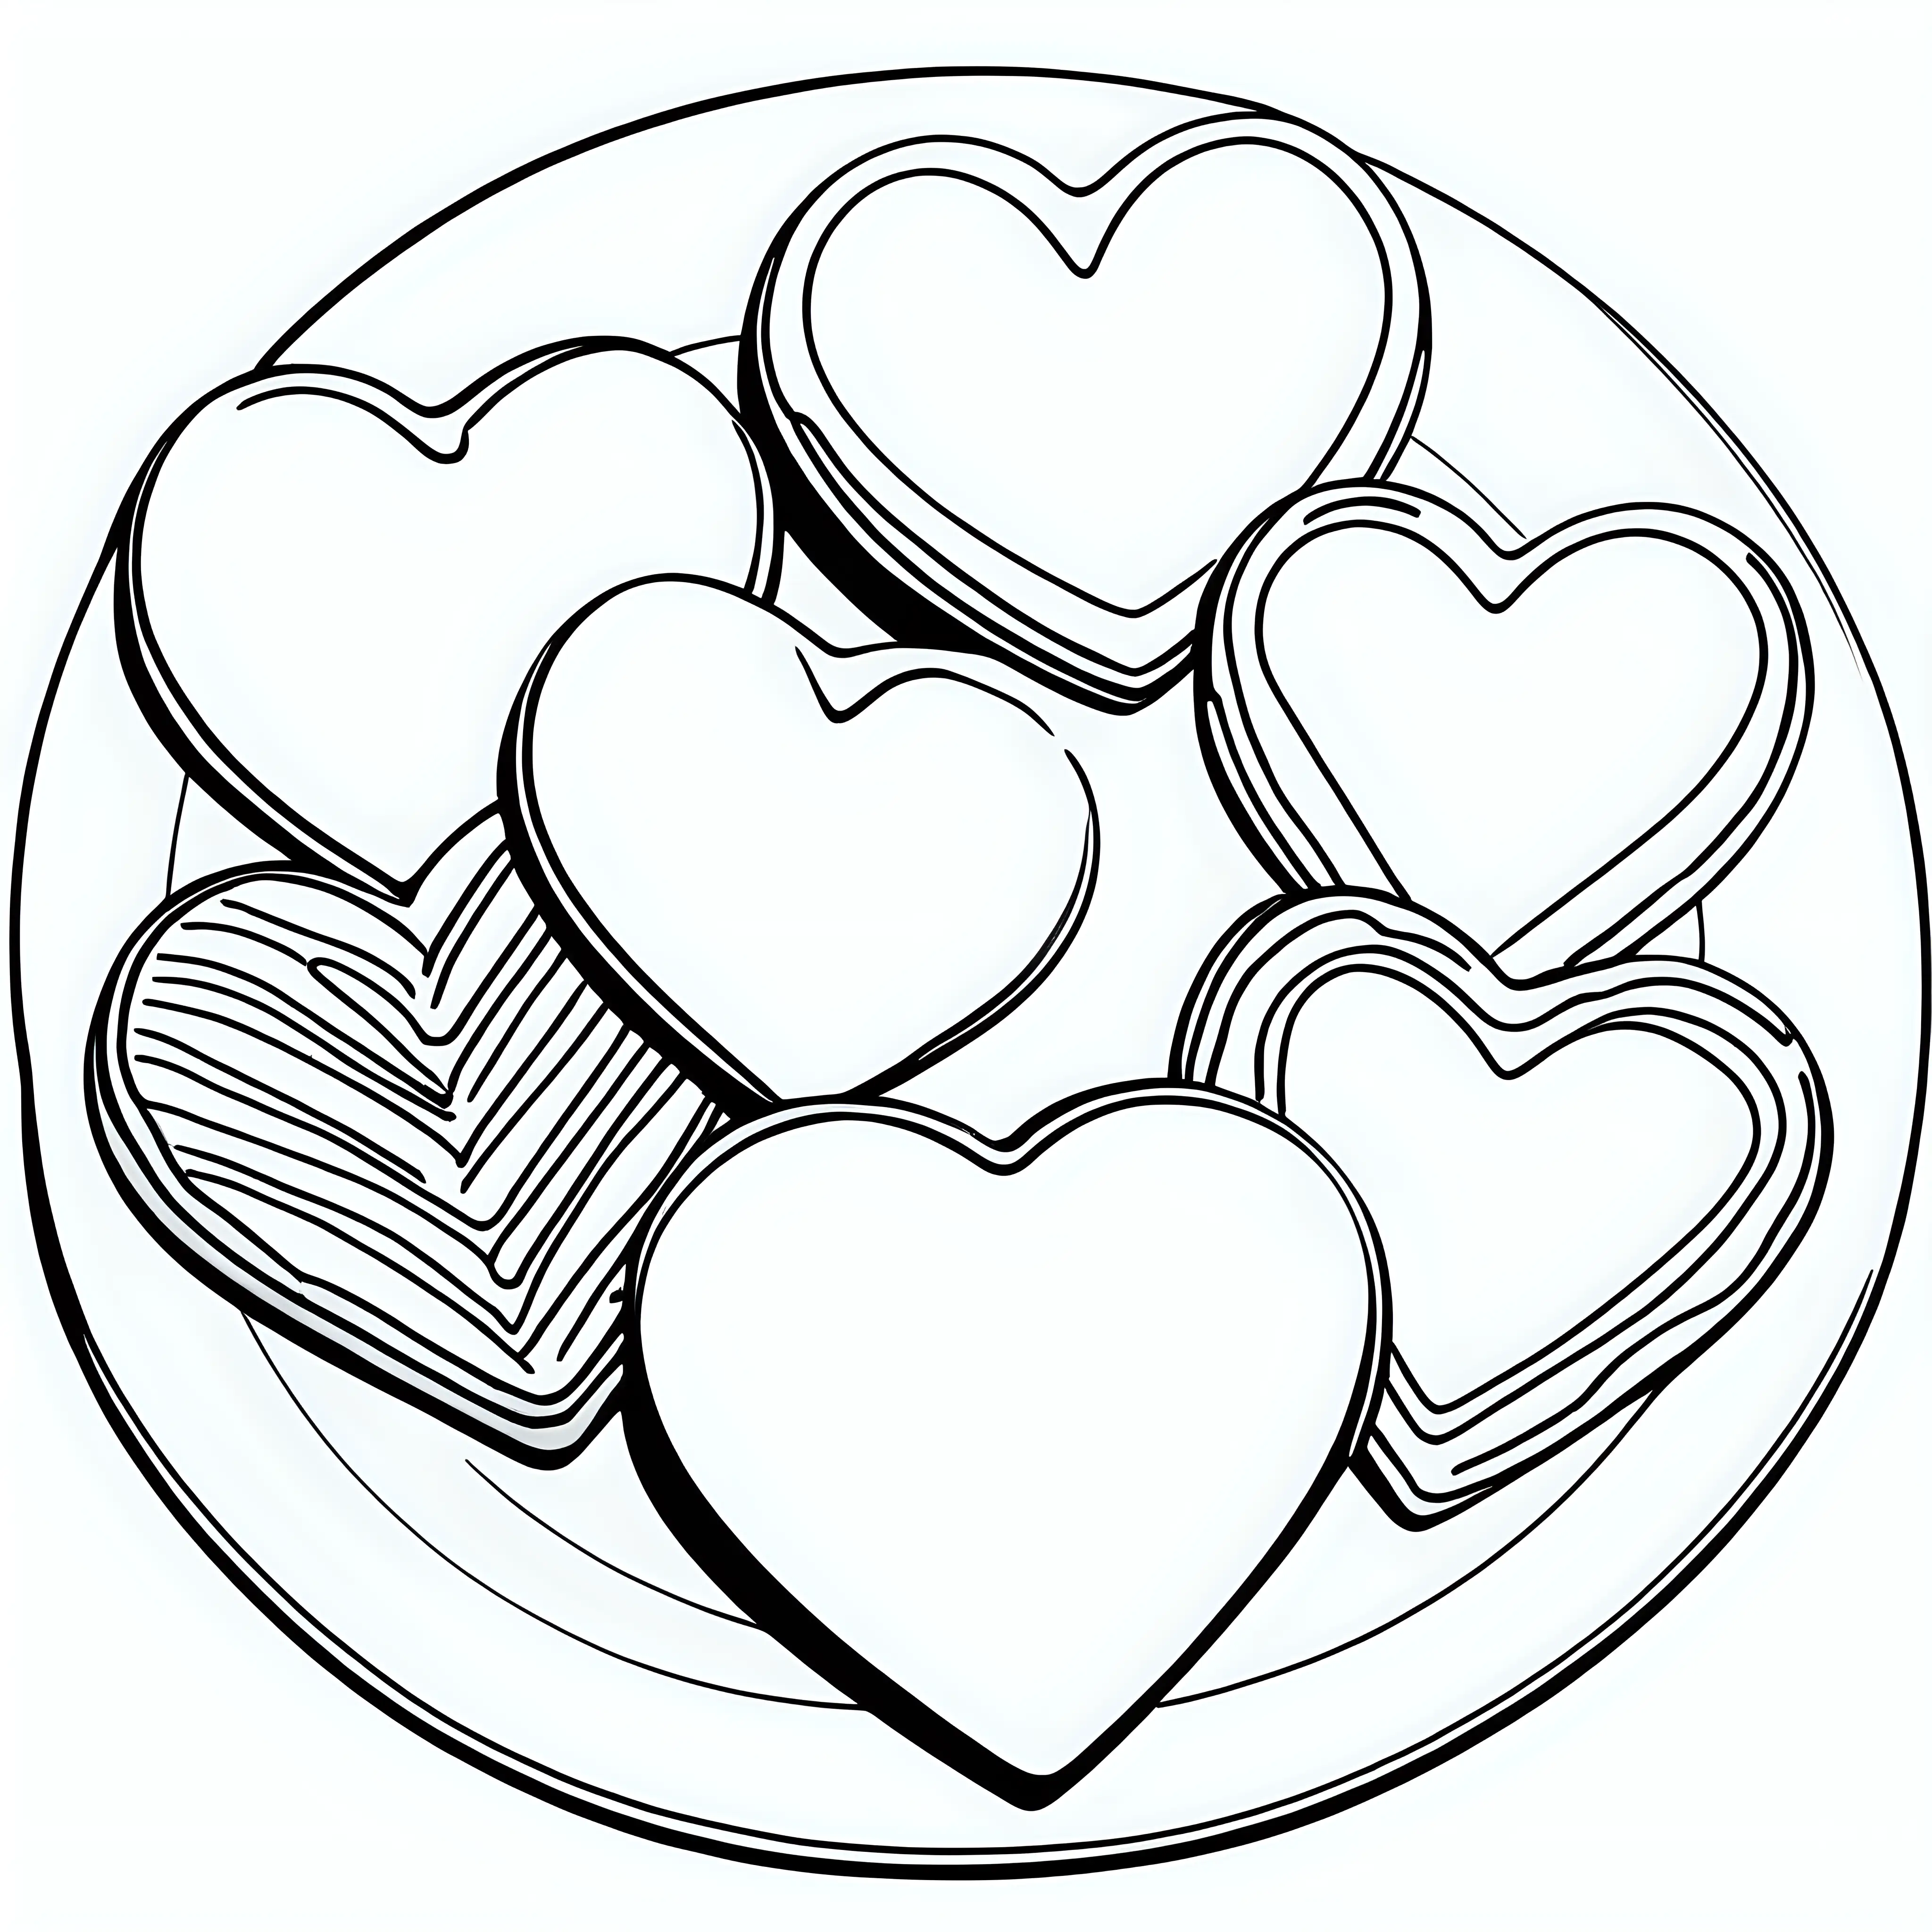 HeartShaped Cookie Decorating Fun and Easy Coloring Activity for Children